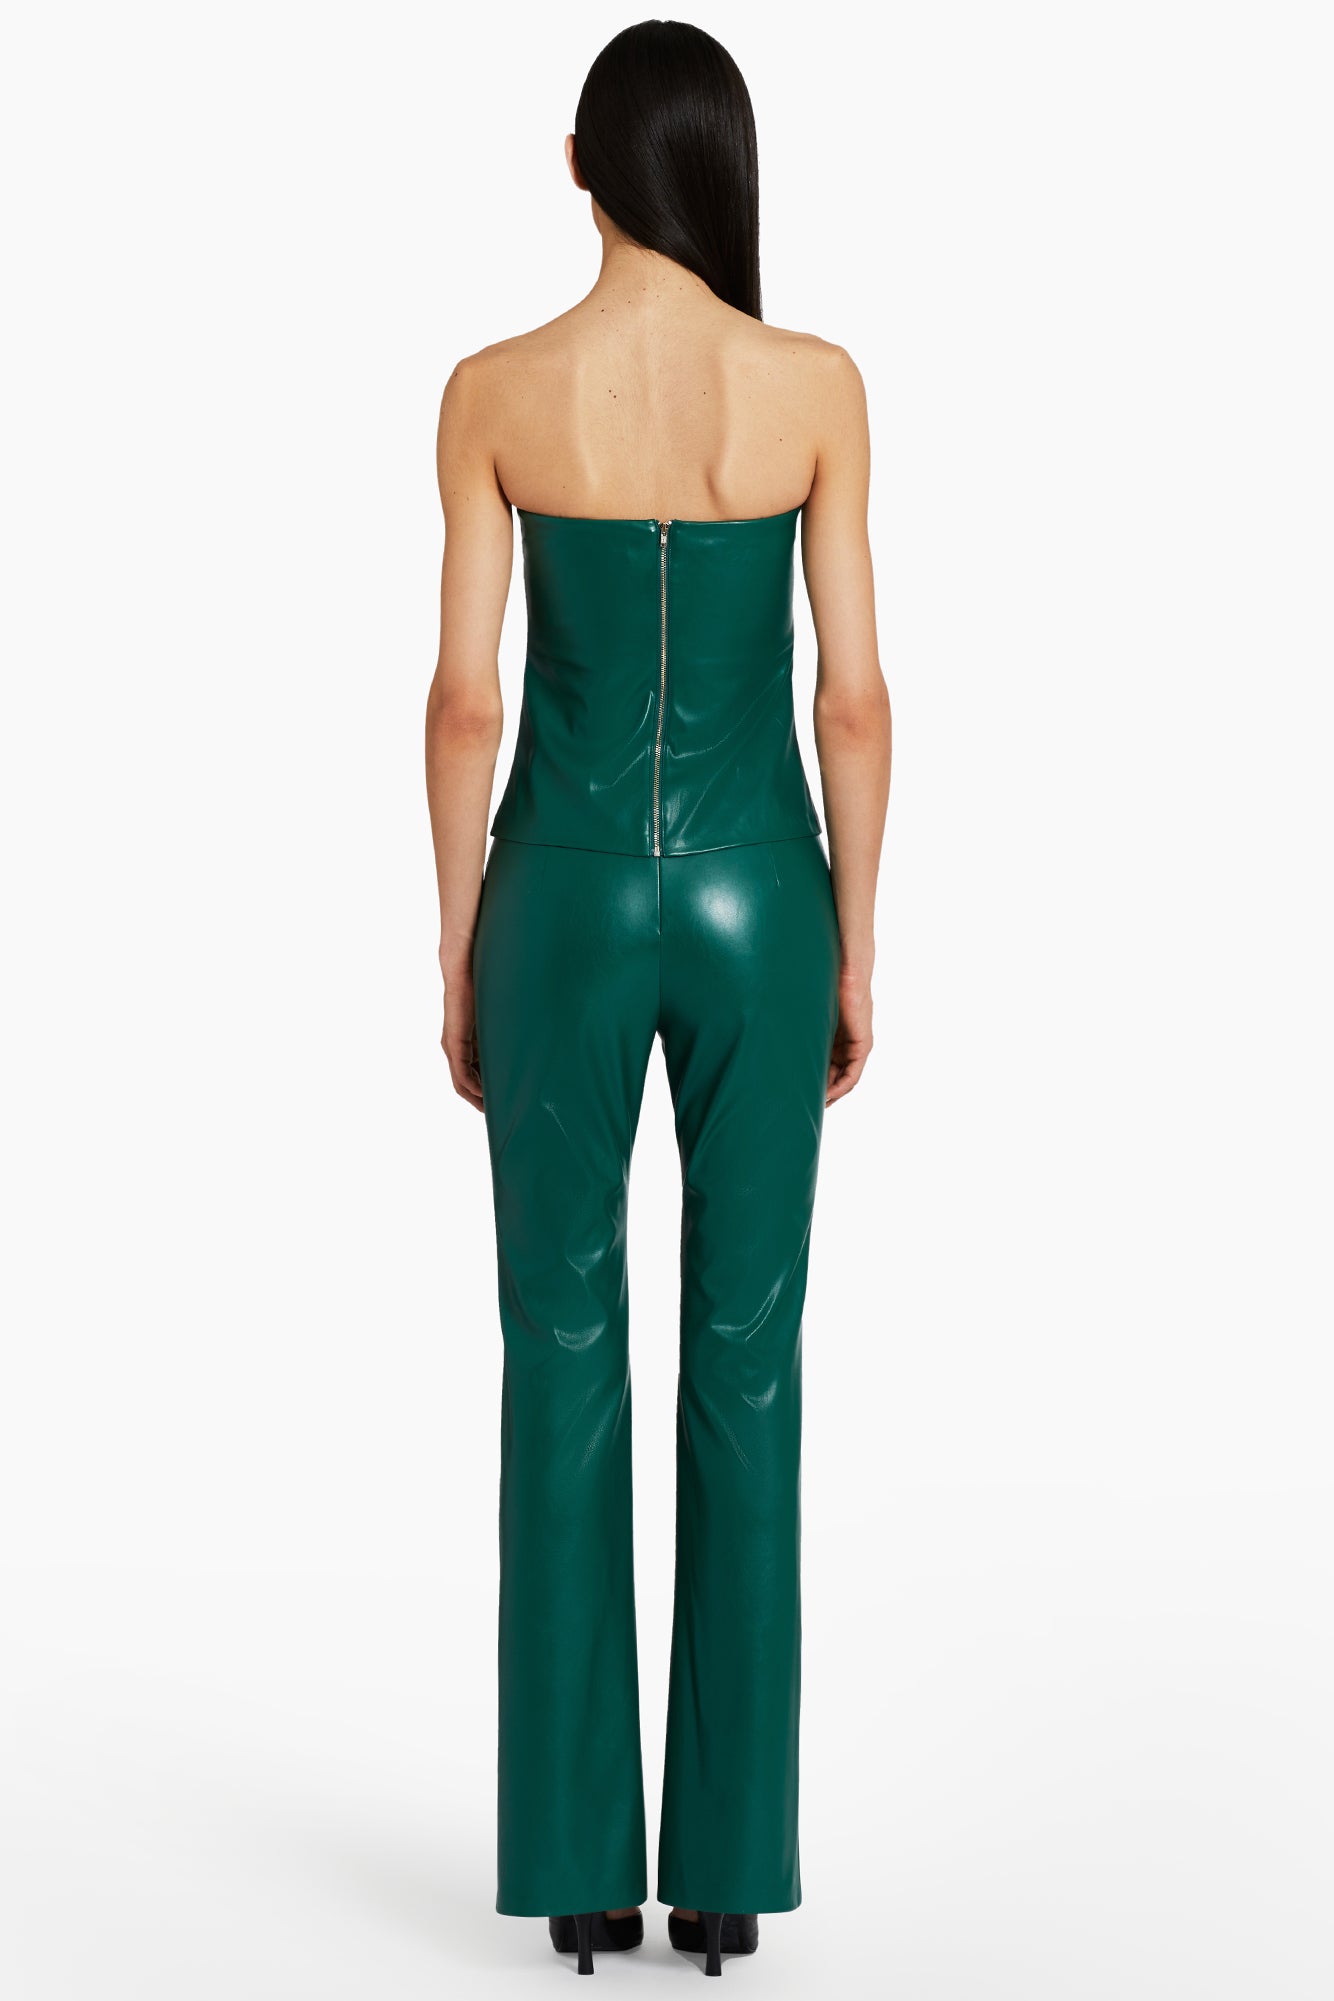 Tavira Pants in Faux Leather